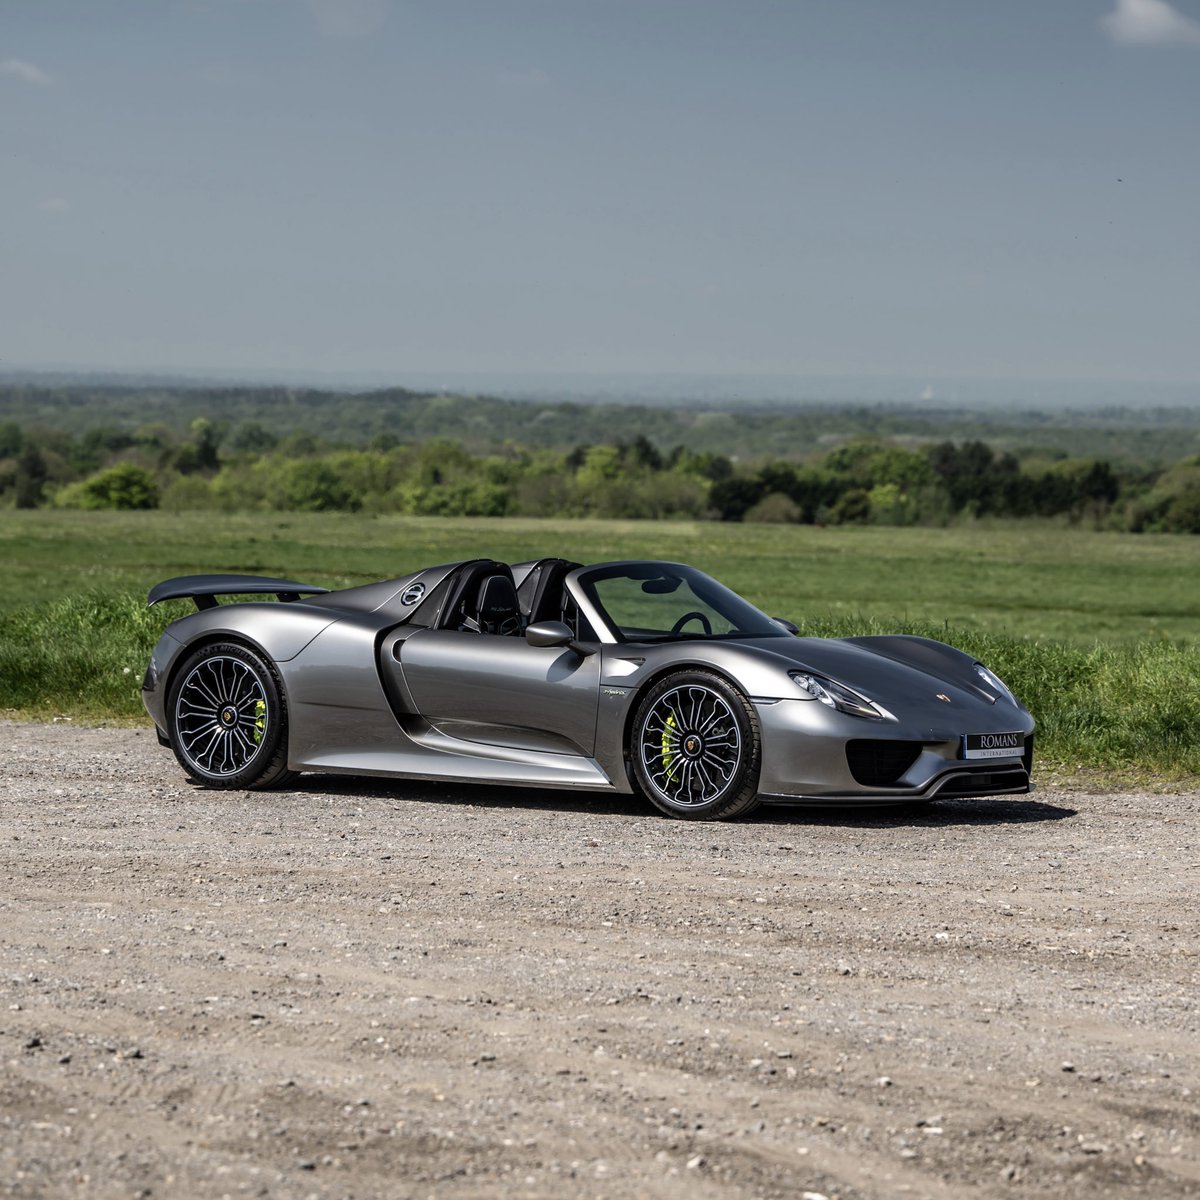 Re-launching our 918 Spyder for sale this week at a new and very attractive price.